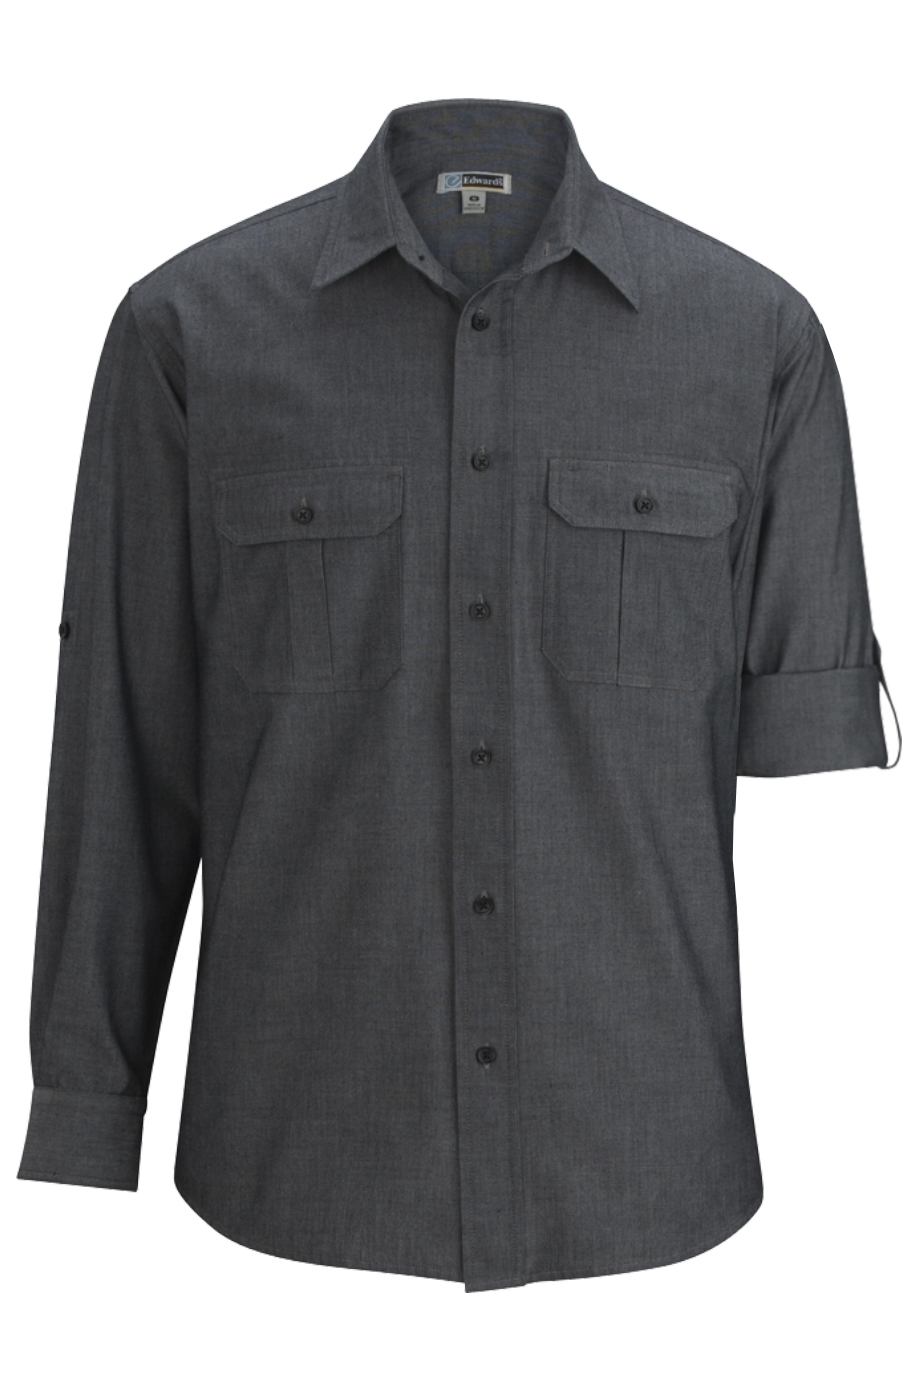 Men's Chambray Roll Up Sleeve Shirt 1298